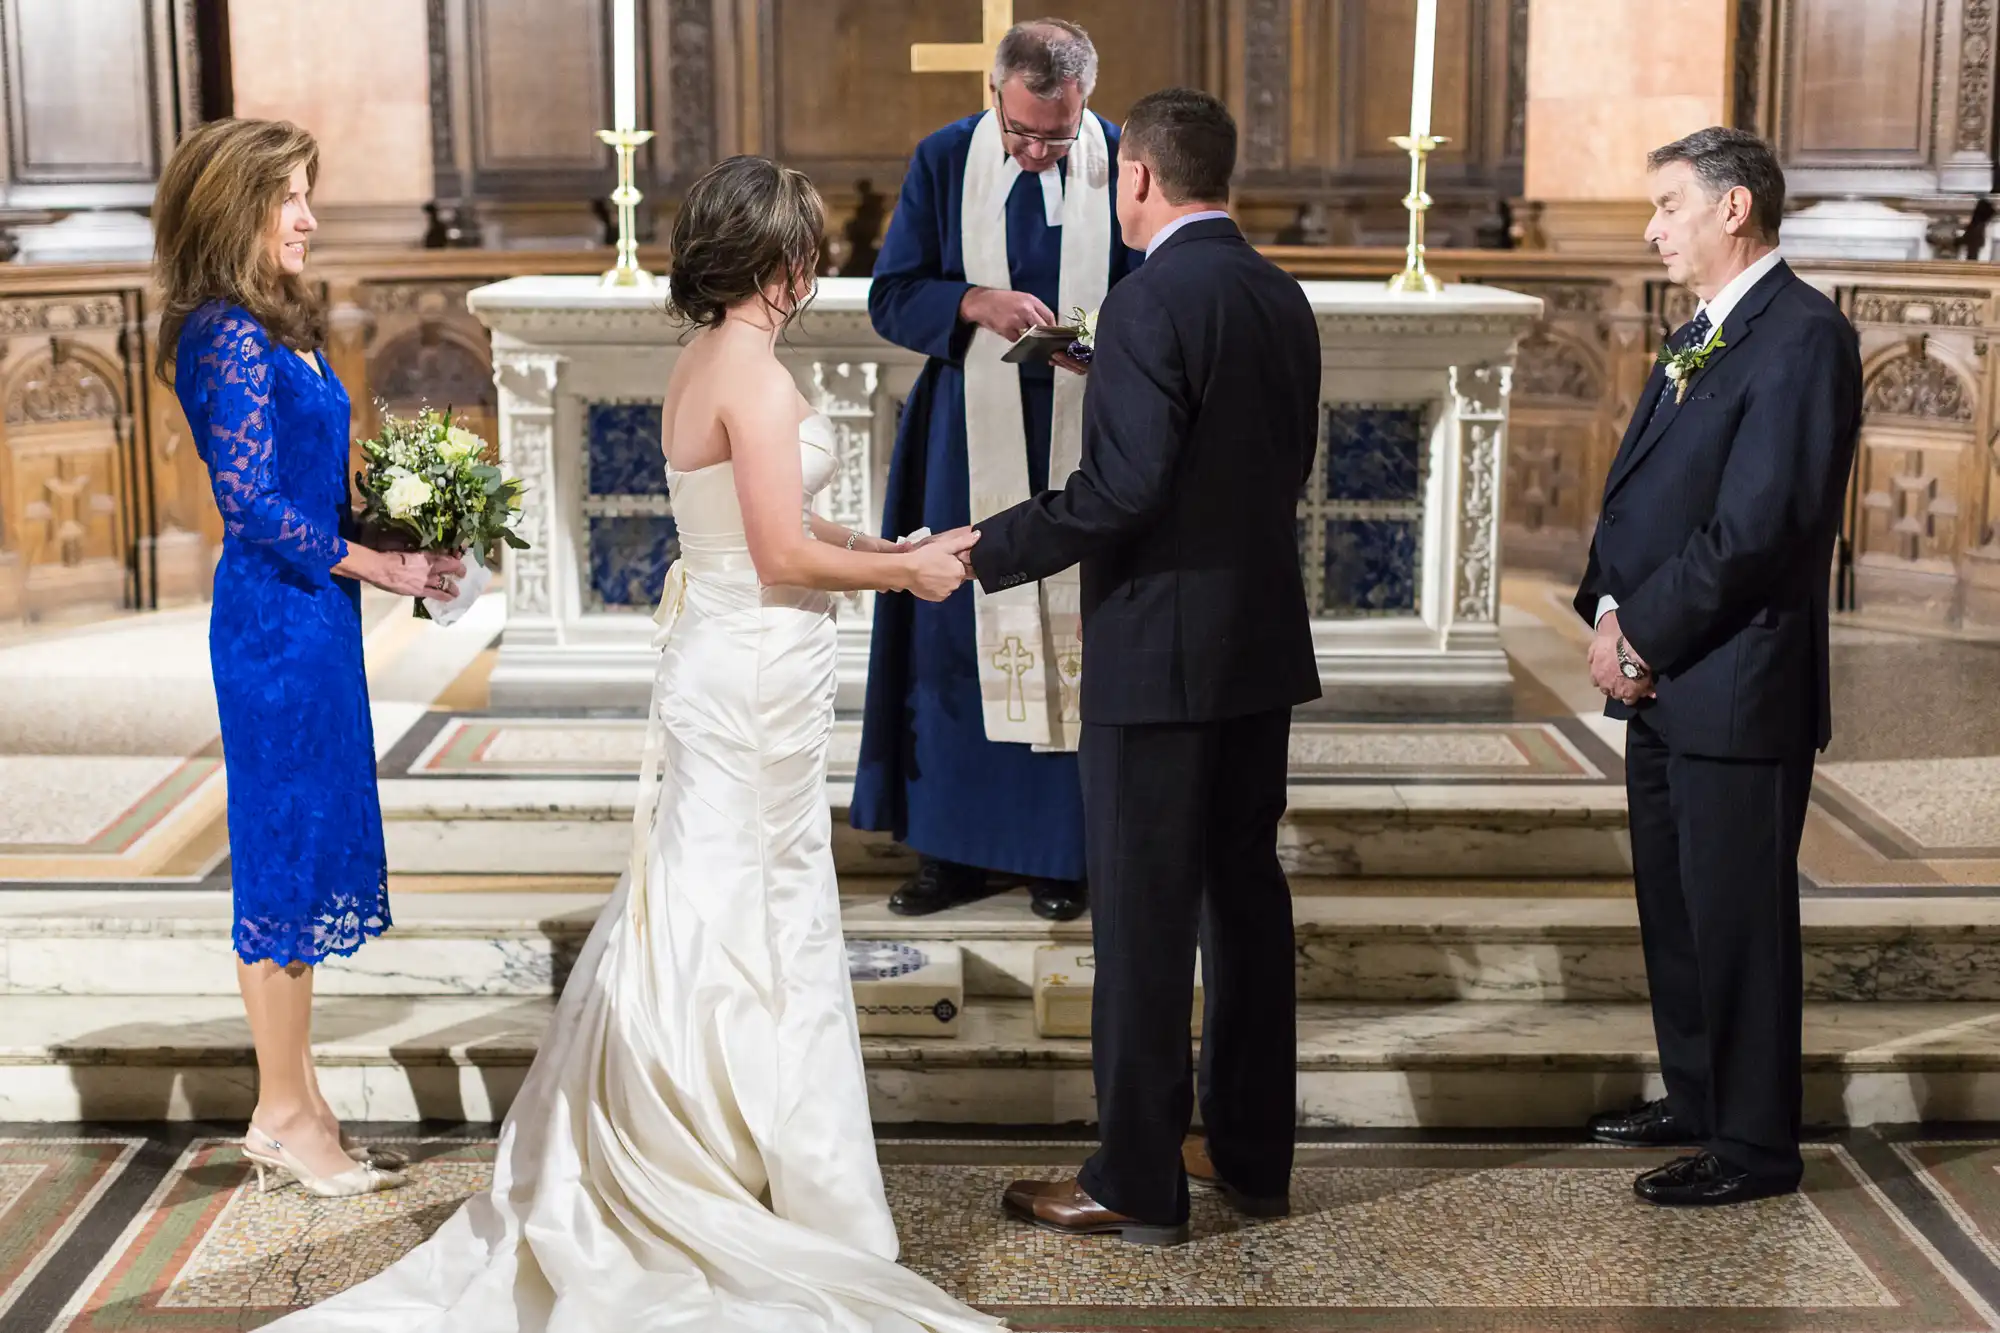 A wedding ceremony in a church with a bride and groom exchanging rings, officiated by a priest, as two witnesses look on.